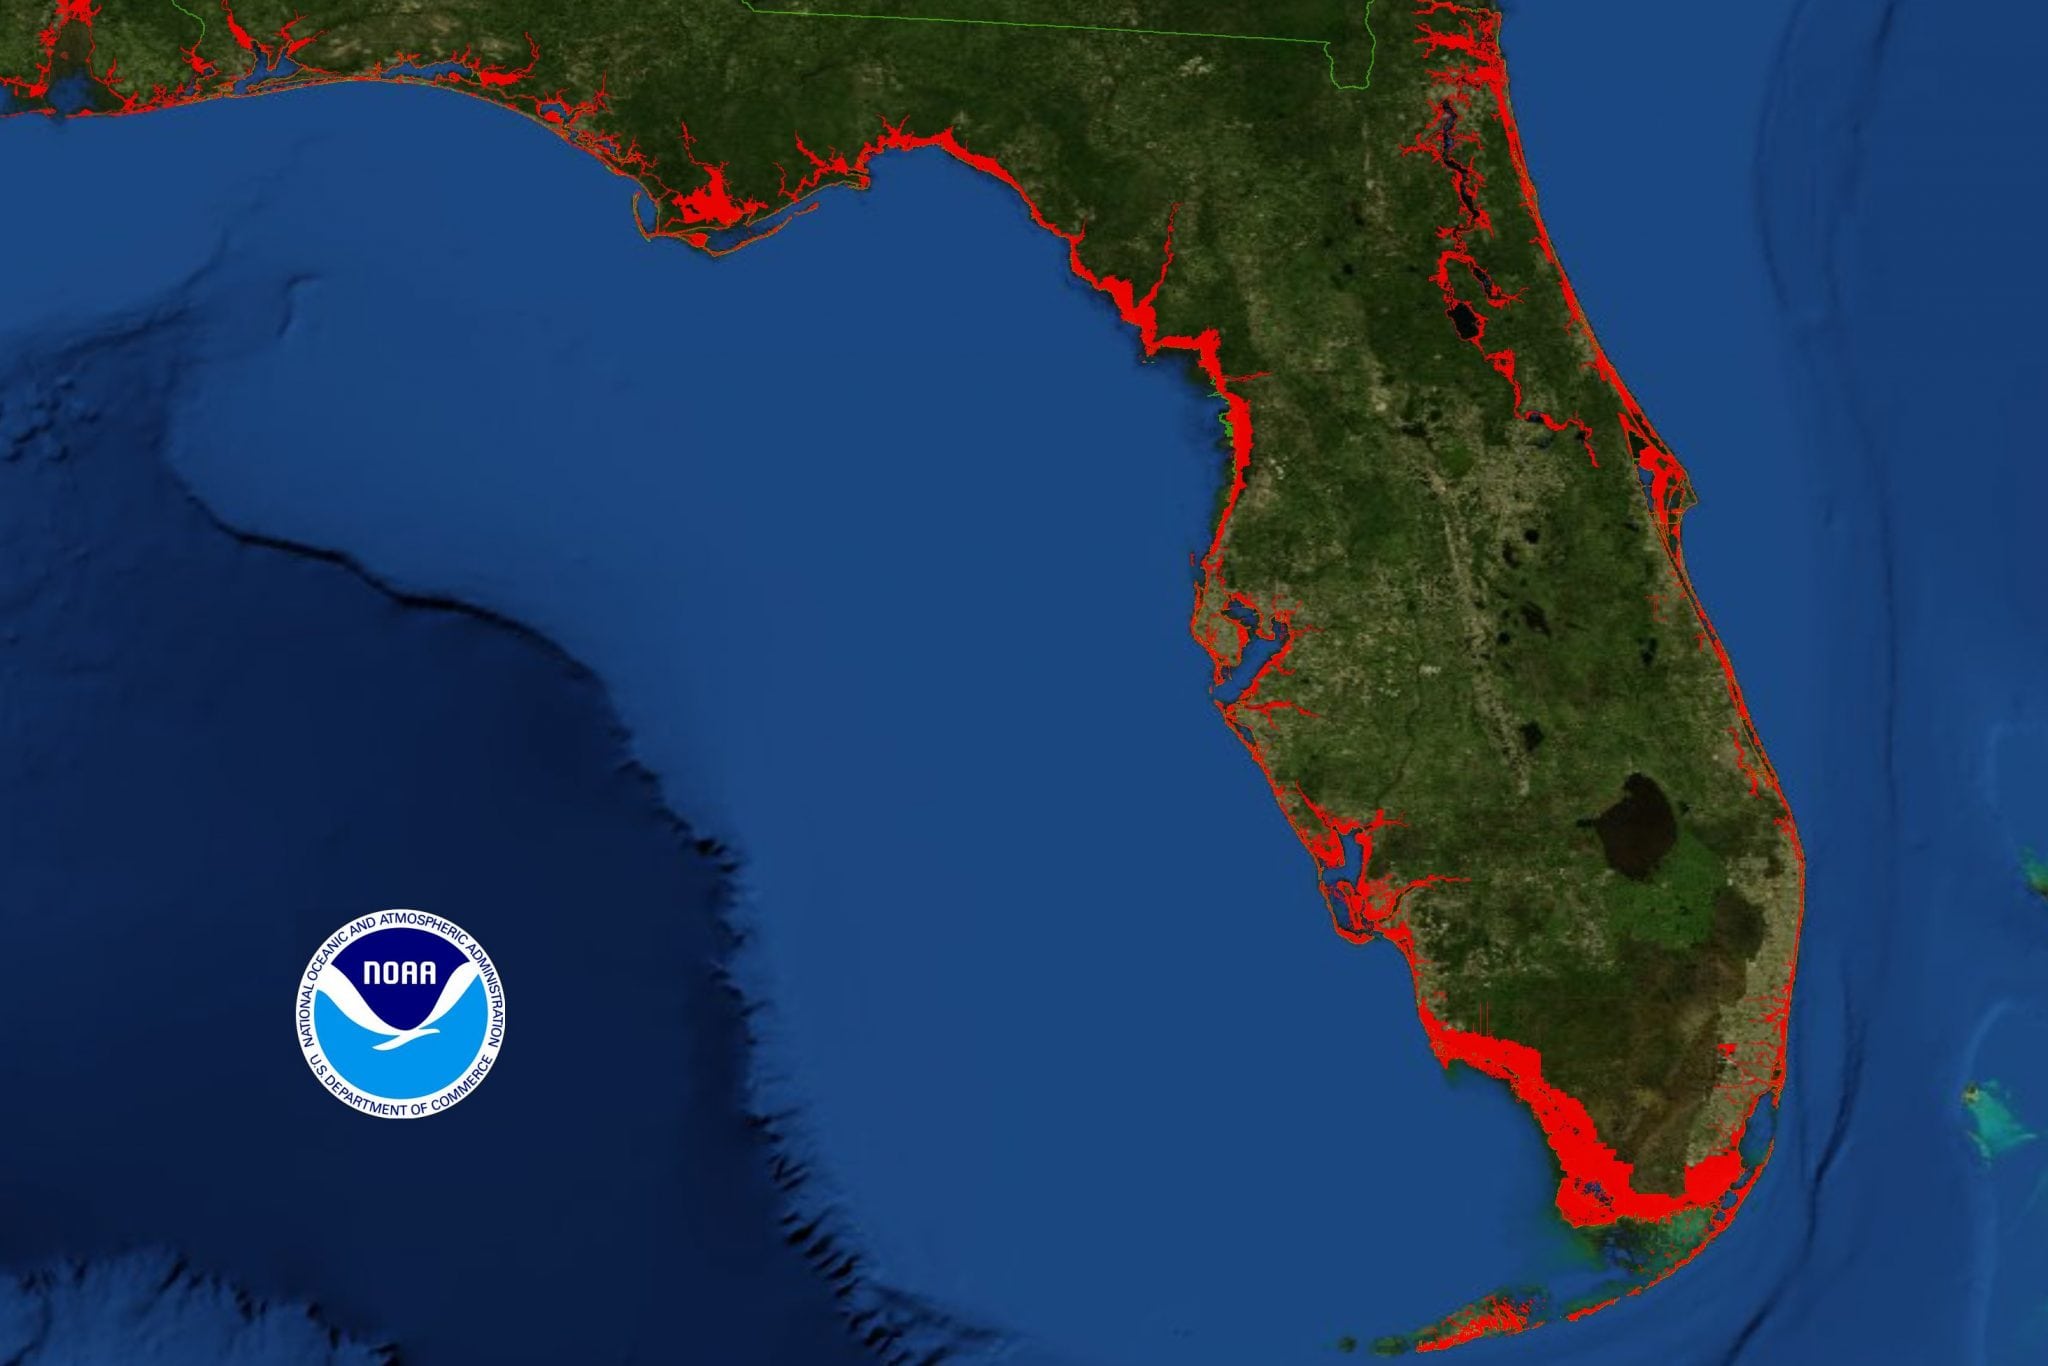 The most recent modeling data for a three-foot rise in sea levels, which climate scientists project could happen in Florida by 2100.